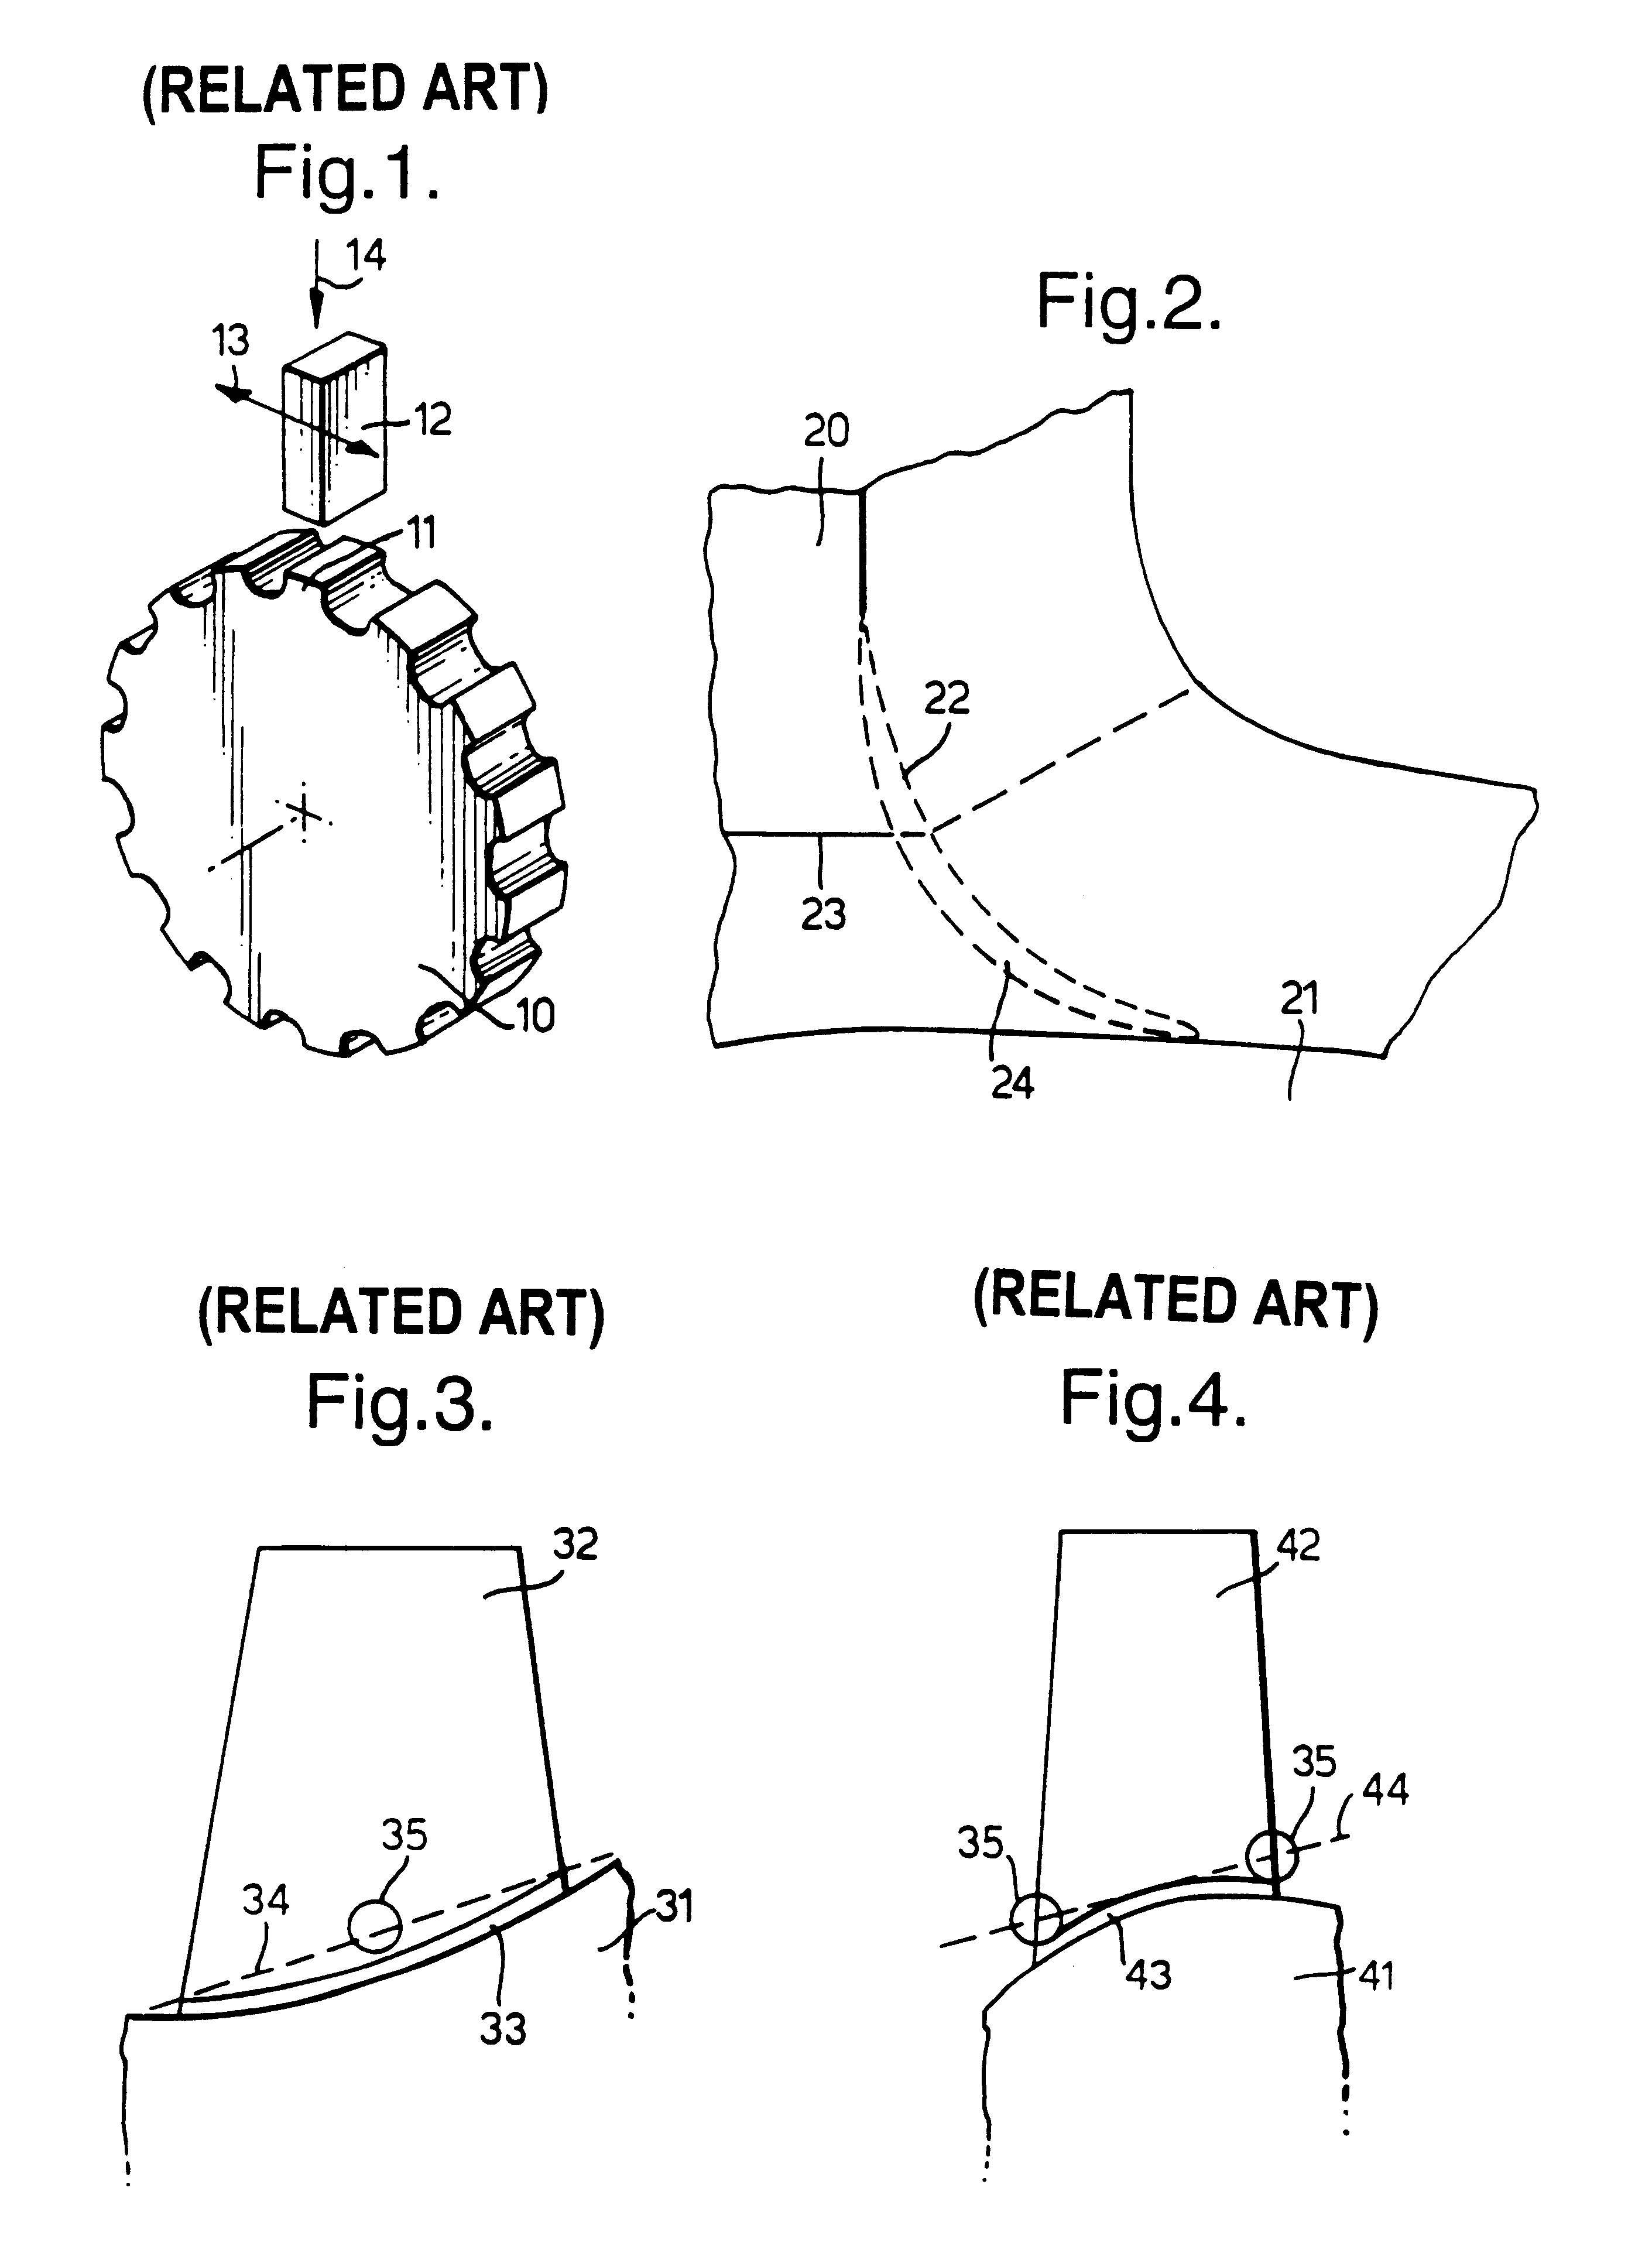 Disk for a blisk rotary stage of a gas turbine engine